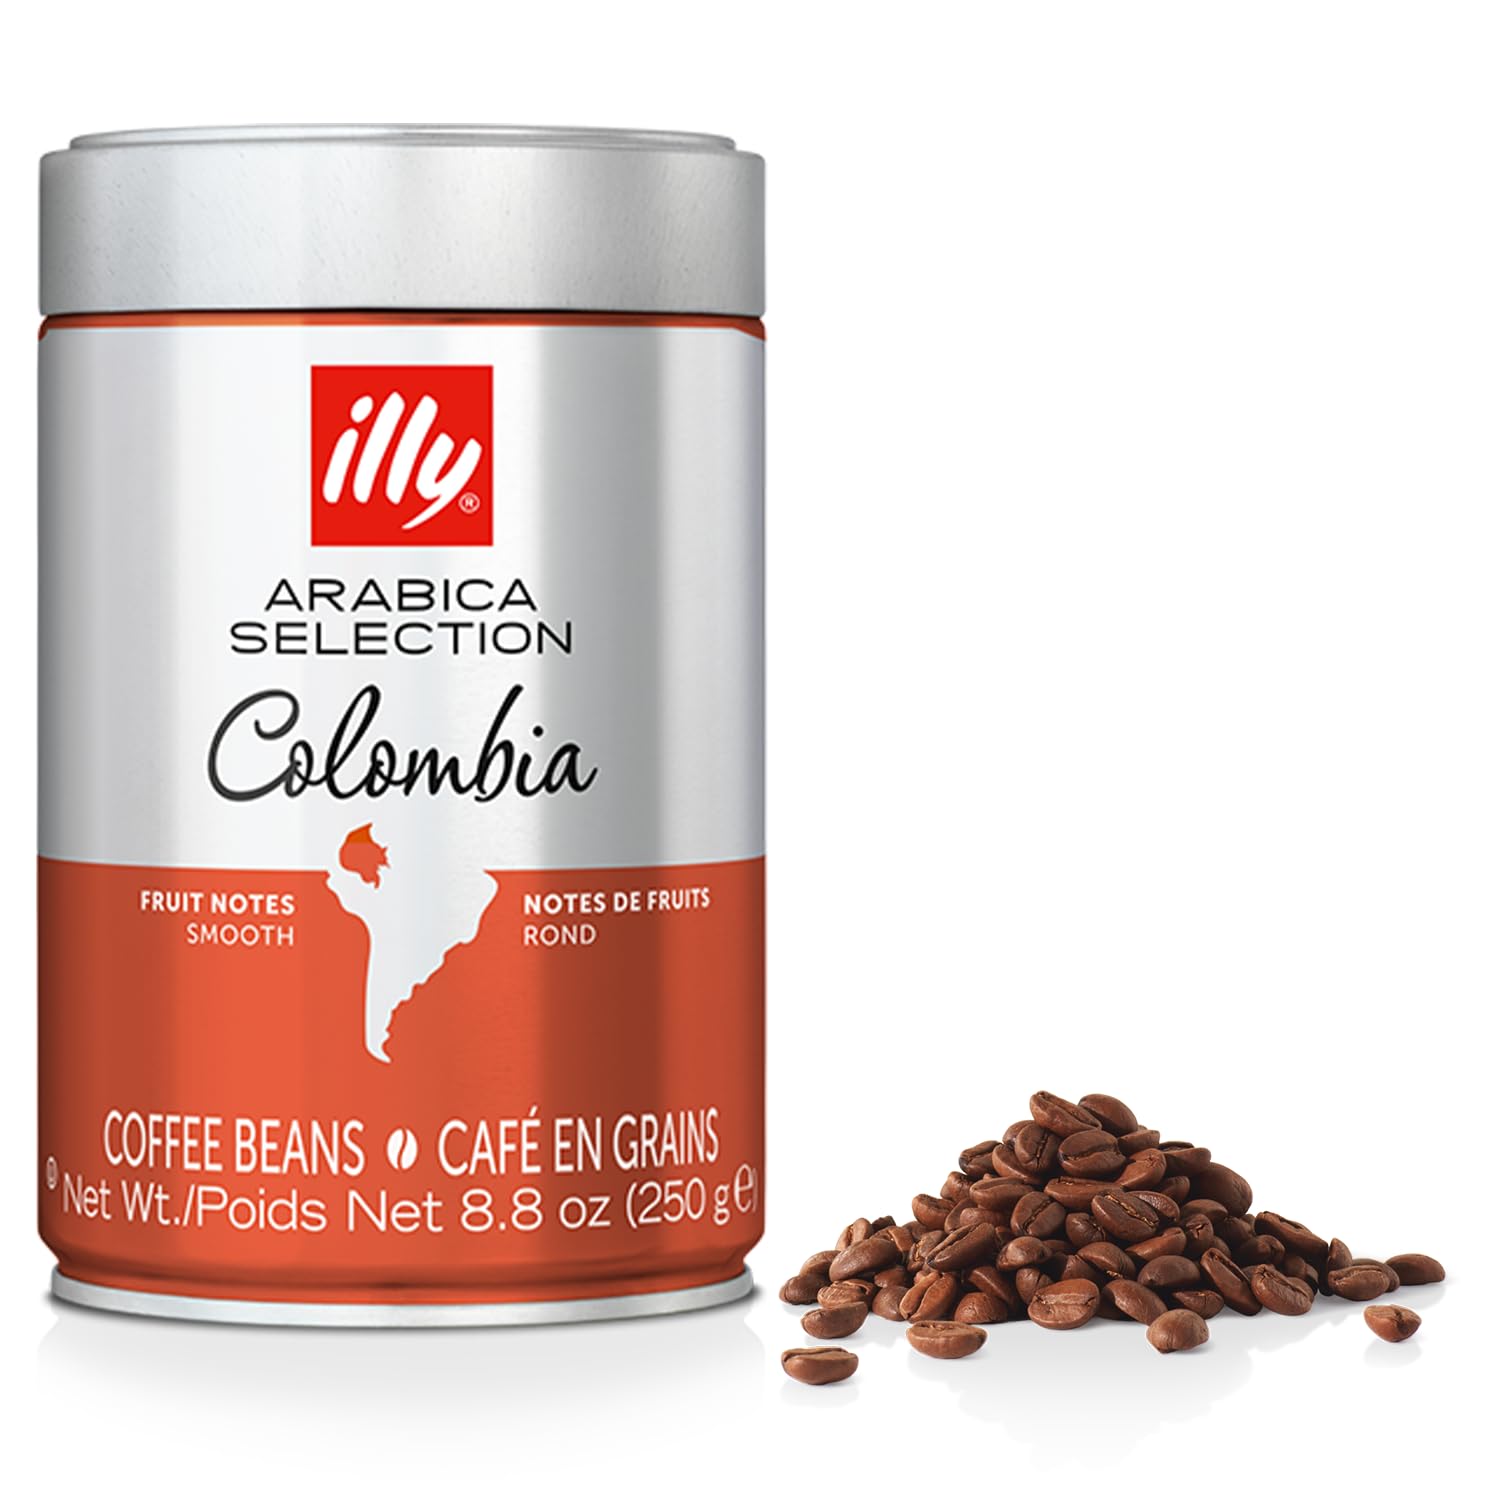 illy Whole Bean Coffee - Perfectly Roasted Whole Coffee Beans – Colombia Medium Roast – Smooth Taste, Notes of Fruit – Fruit Notes - 100% Arabica Coffee - No Preservatives – 8.8 Ounce